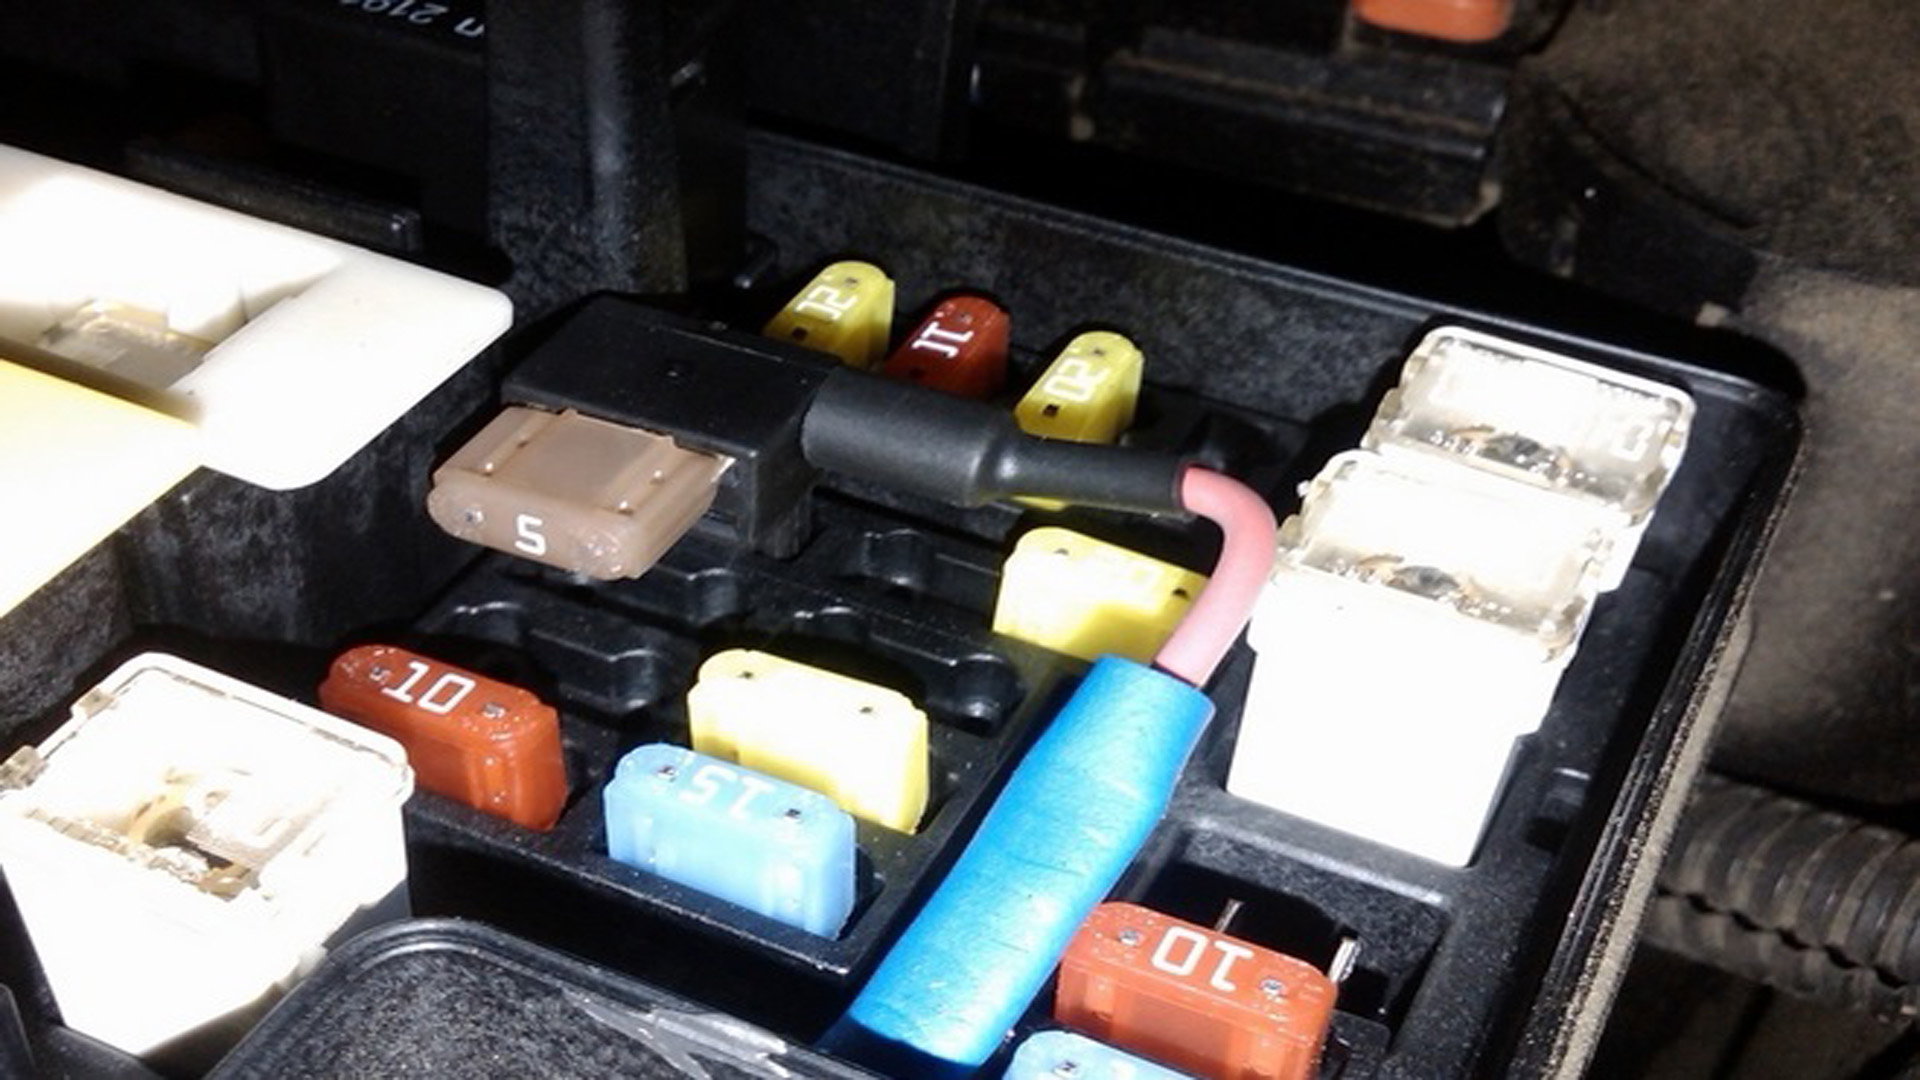 Jeep Wrangler JK: How to Tap Into Fuse Box | Jk-forum